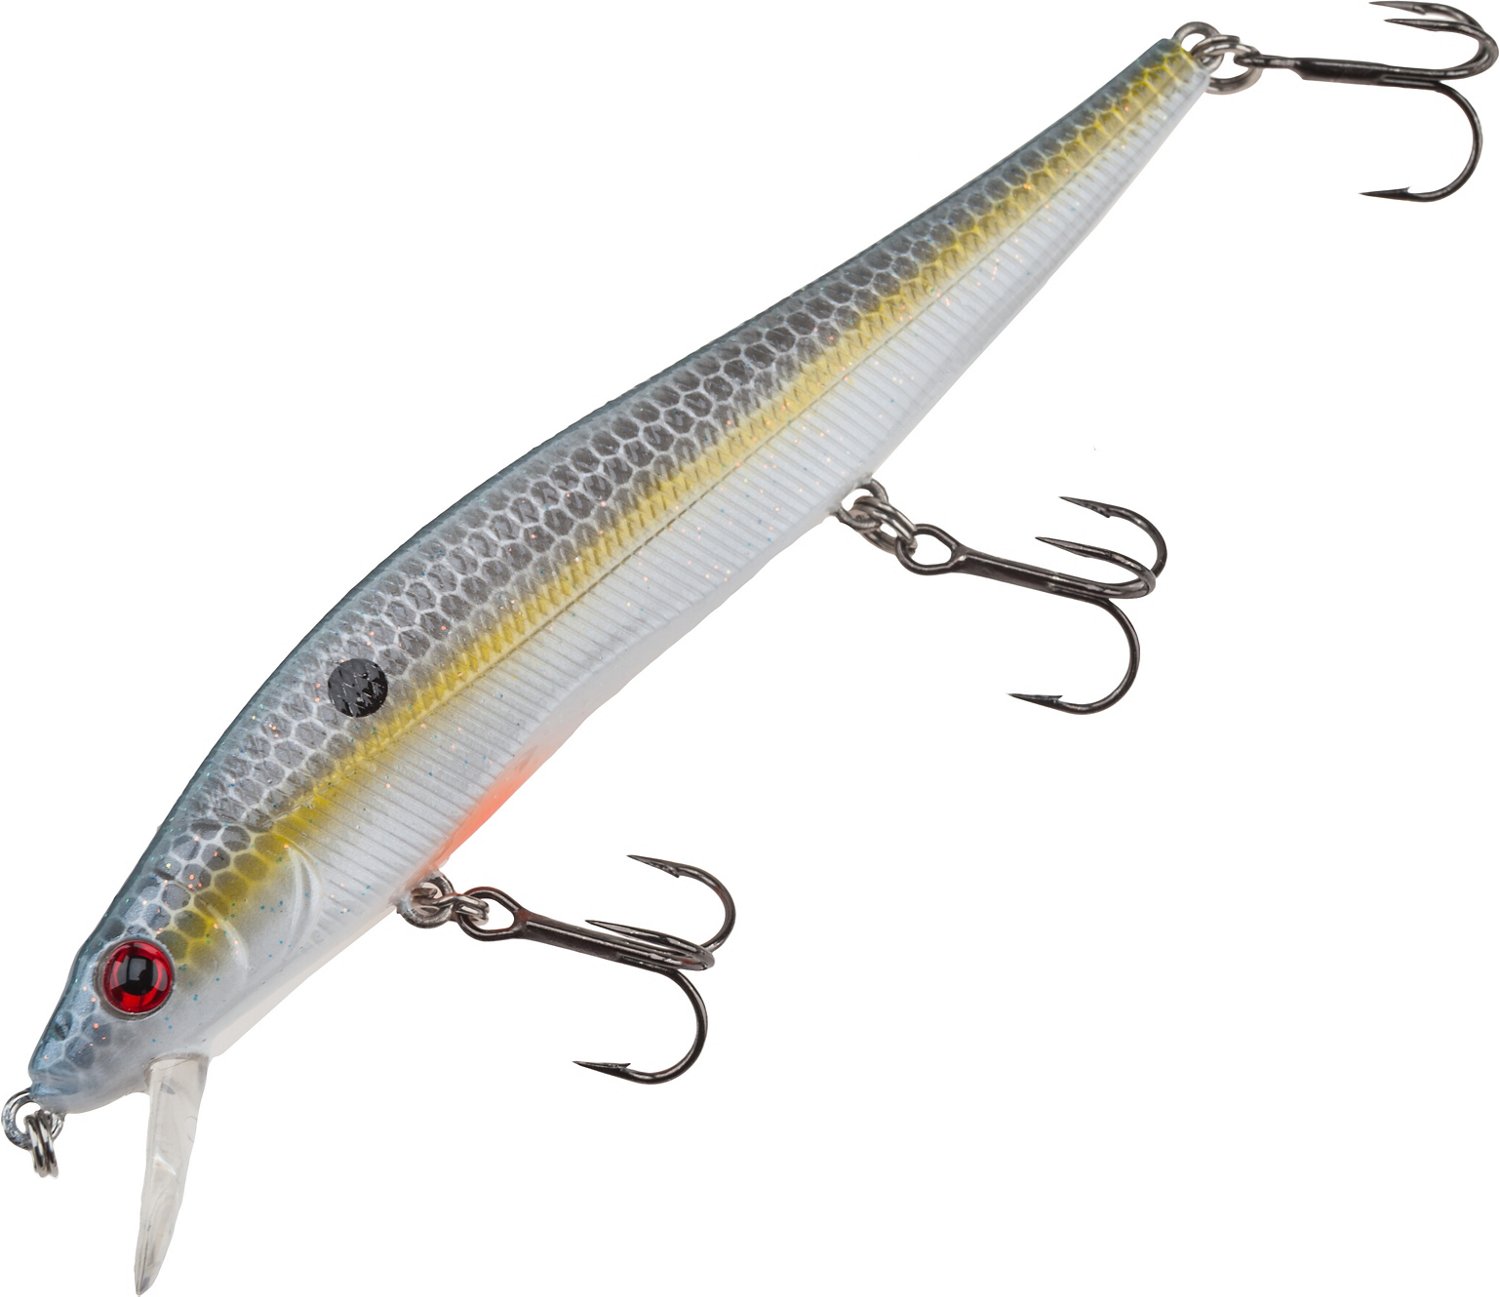 H2O Xpress - Jointed Shad Bass Crankibait – Blue Springs Bait & Tackle